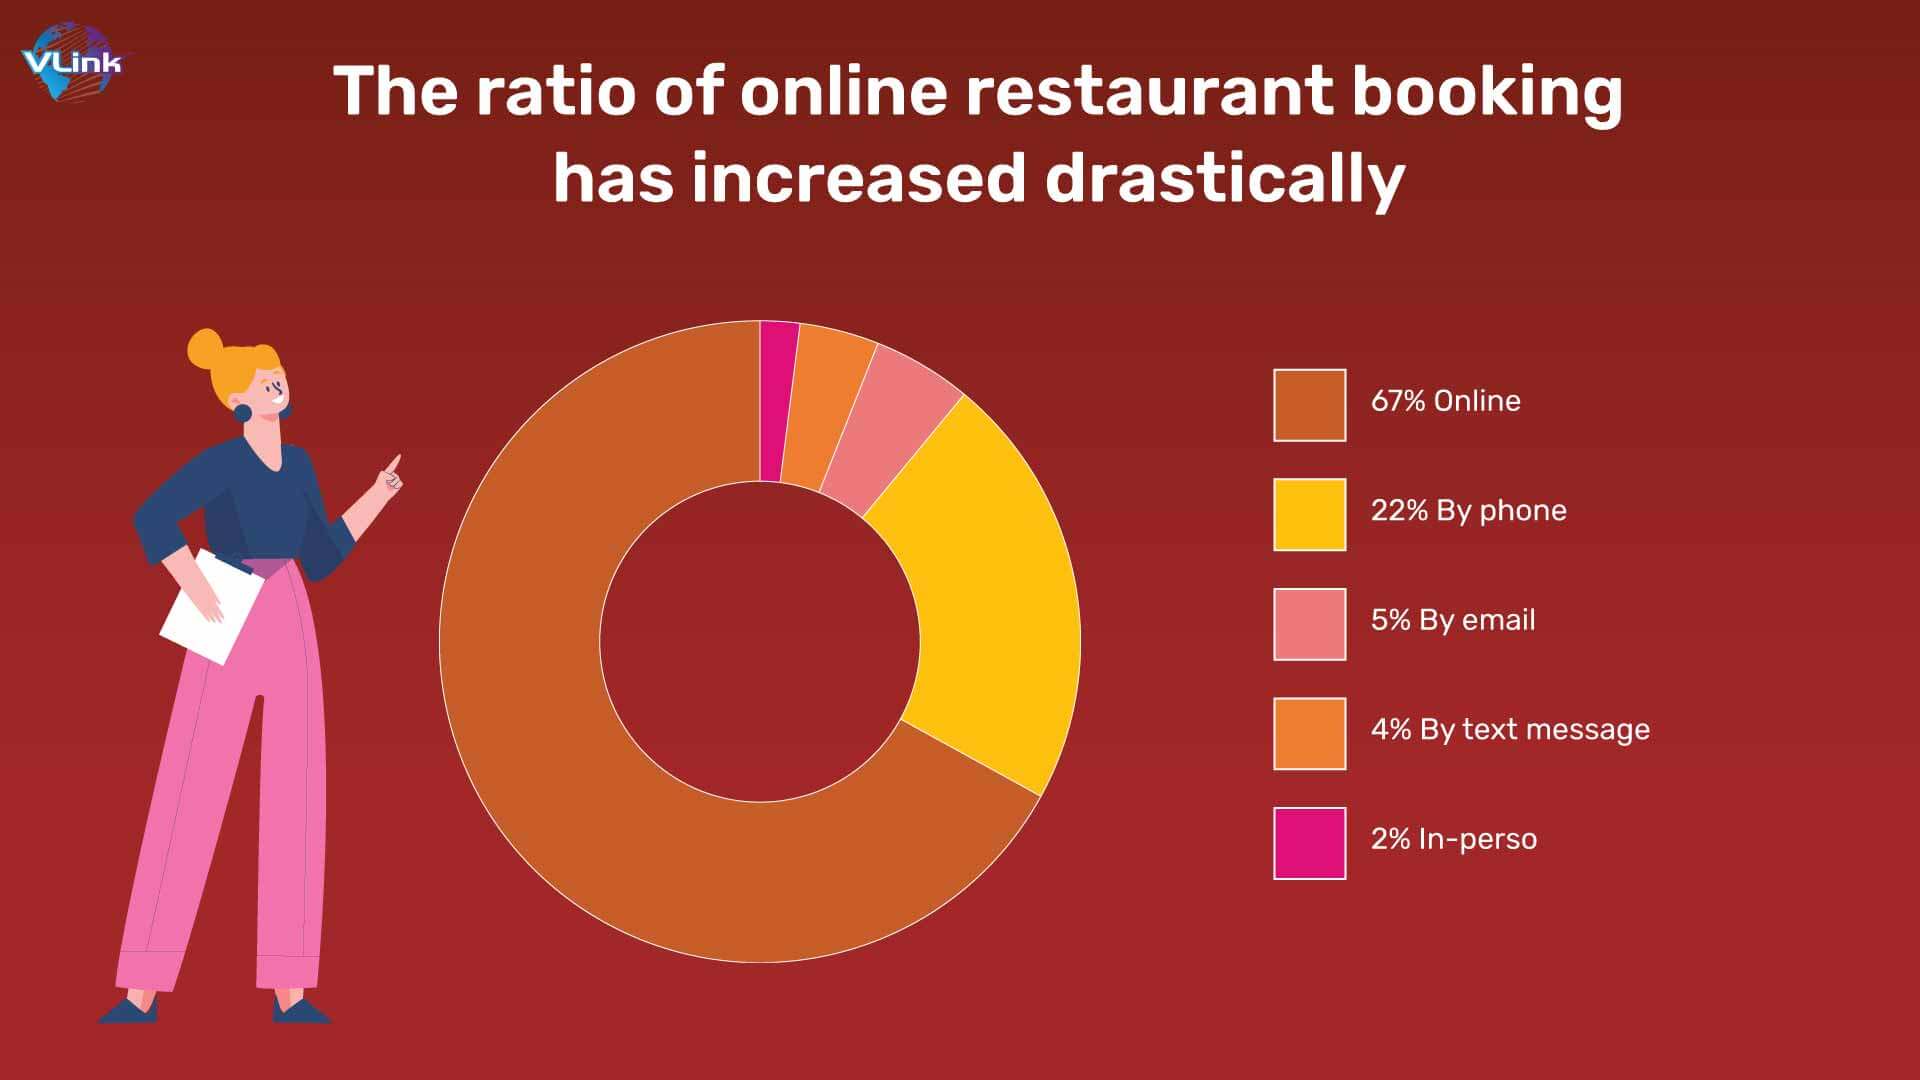 The ratio of online restaurant booking has increased drastically